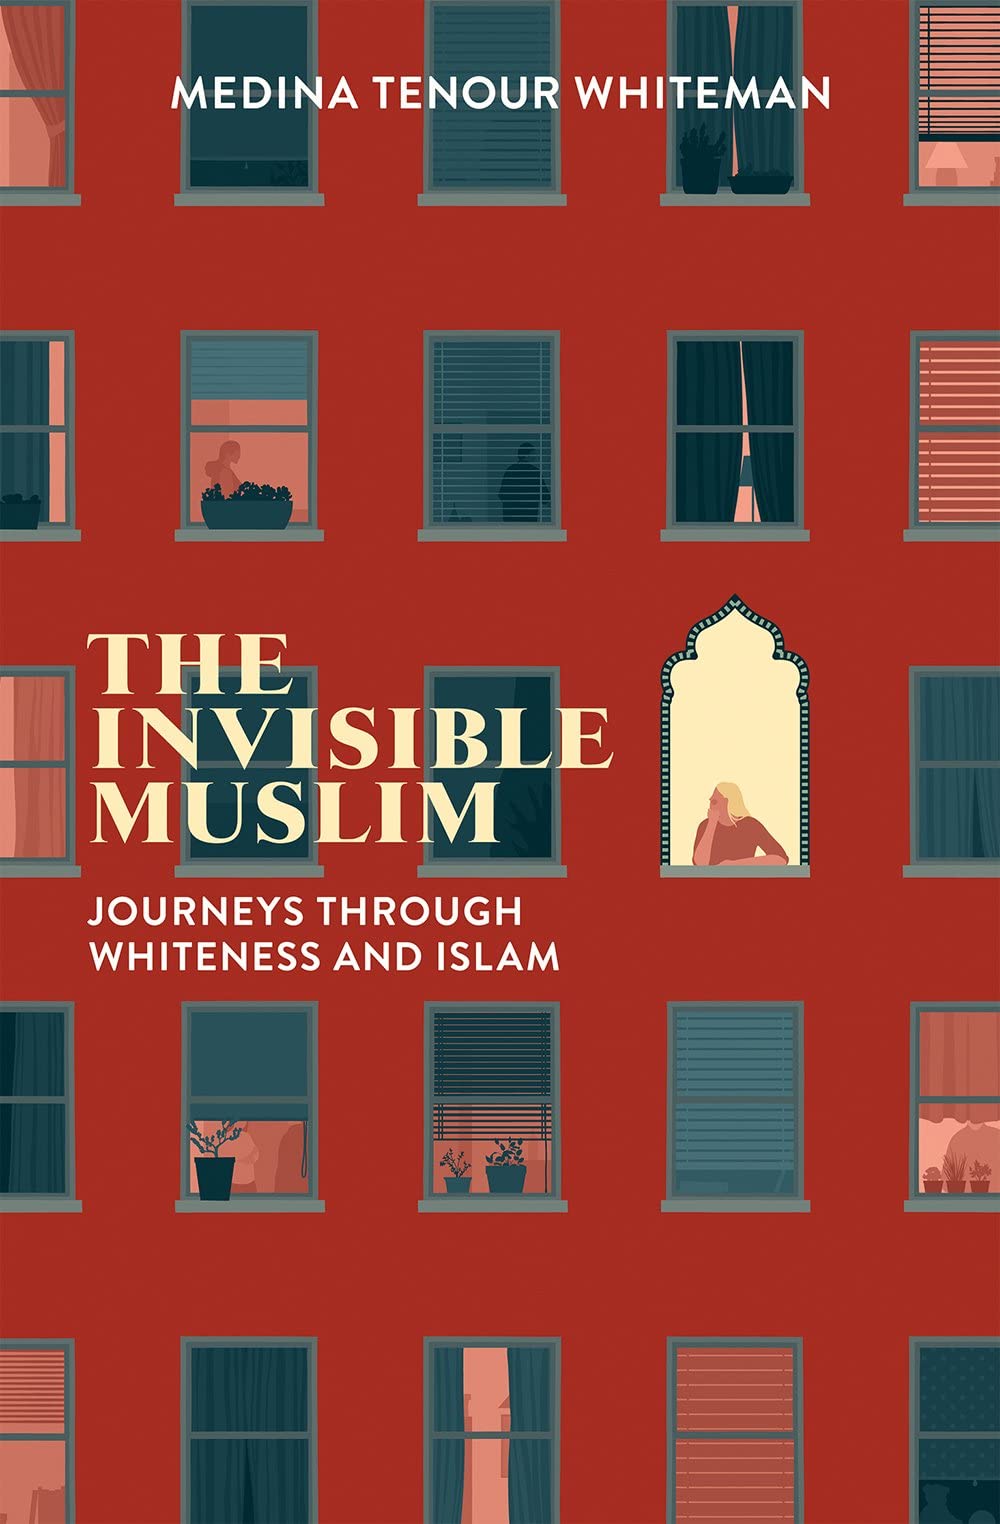 THE INVISIBLE MUSLIM: JOURNEYS THROUGH WHITENESS AND ISLAM